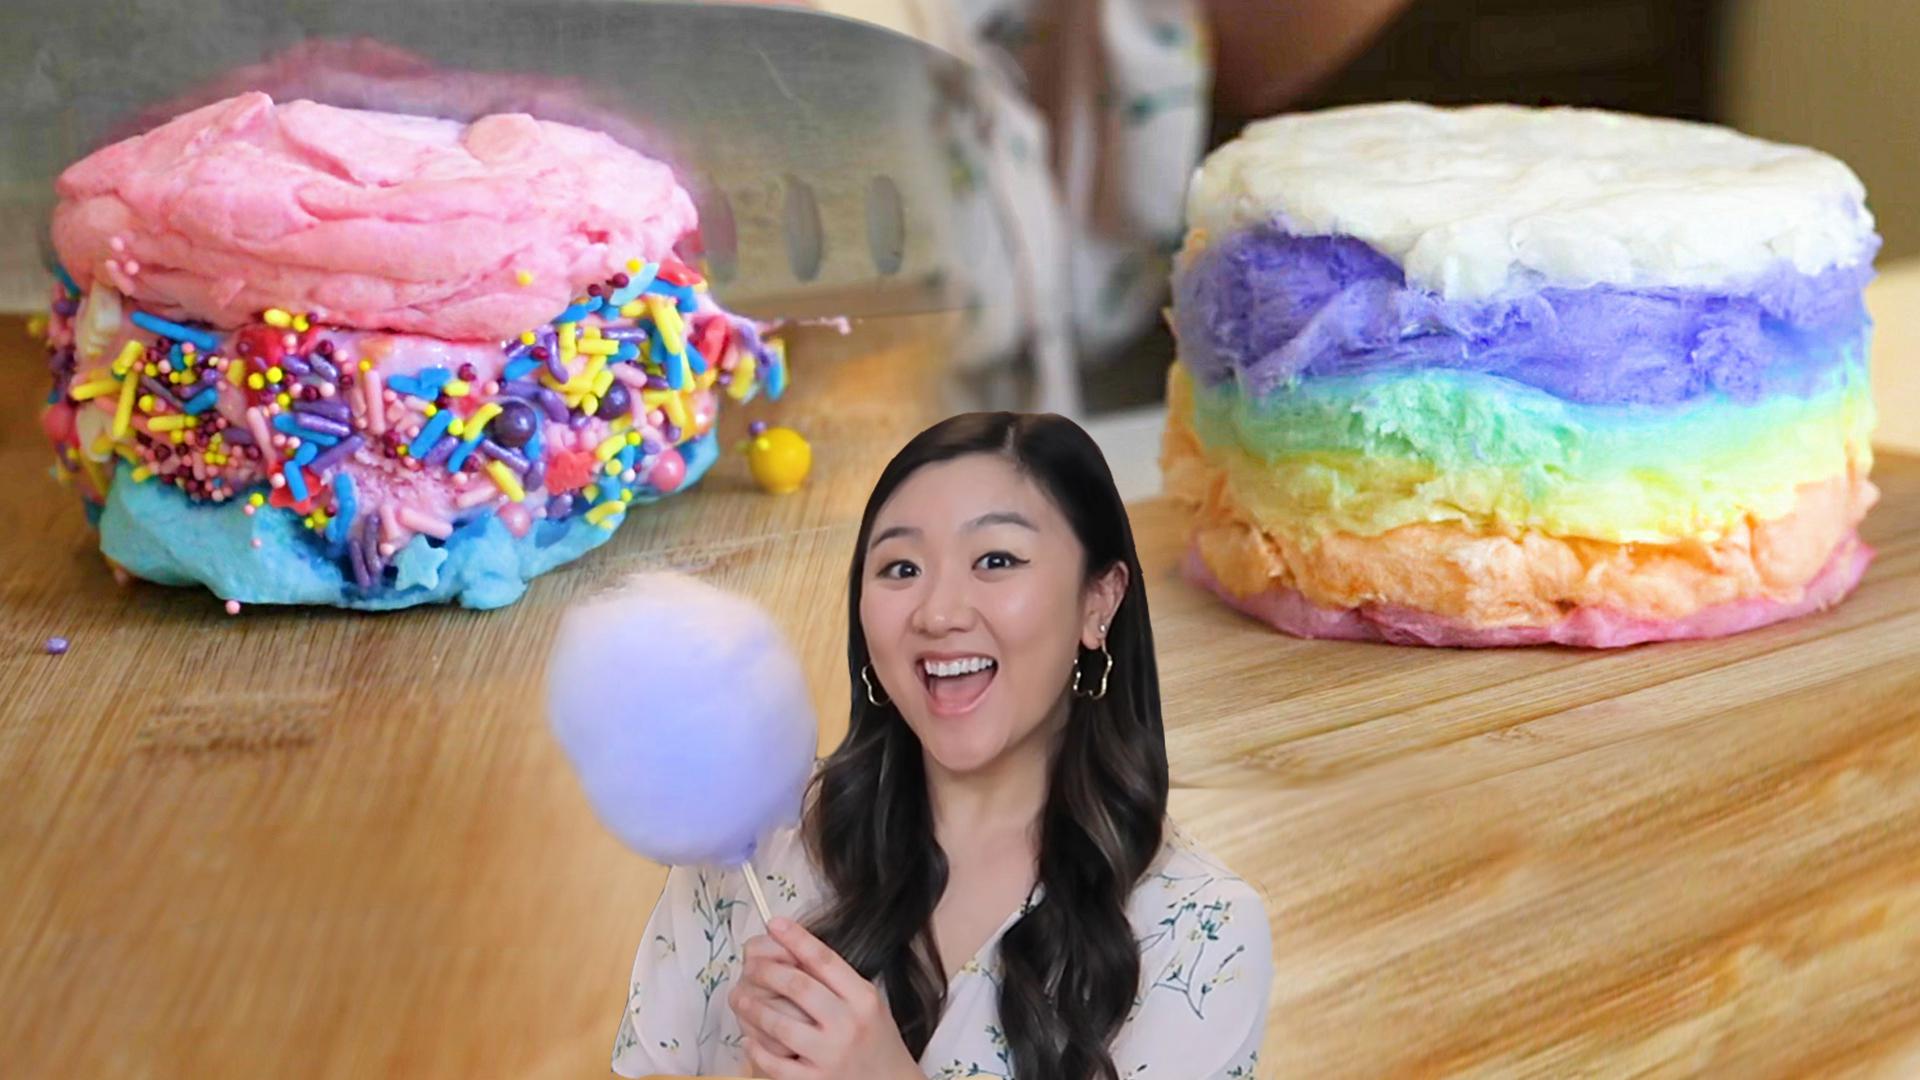 Funfetti Cotton Candy Cake With Striped Cotton Candy Buttercream | Recipes